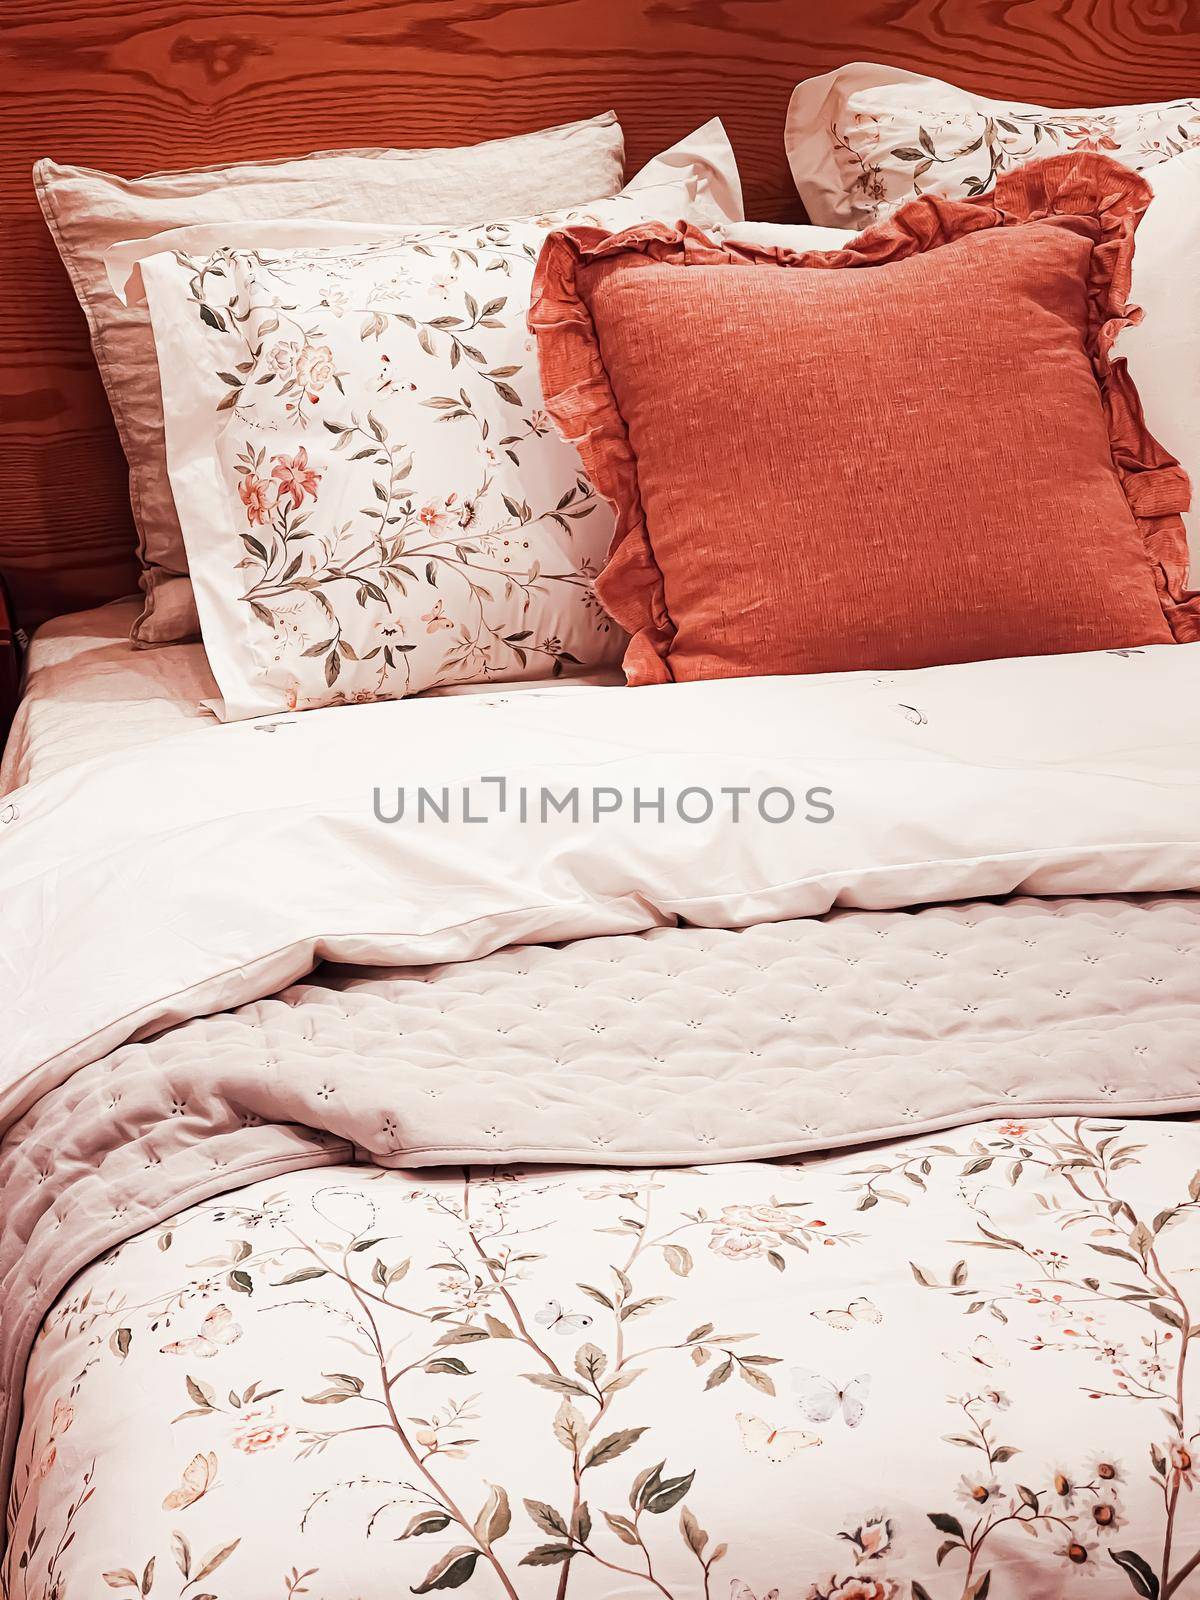 Vintage countryside style bedding with floral pattern on wooden bed in bedroom, interior design detail